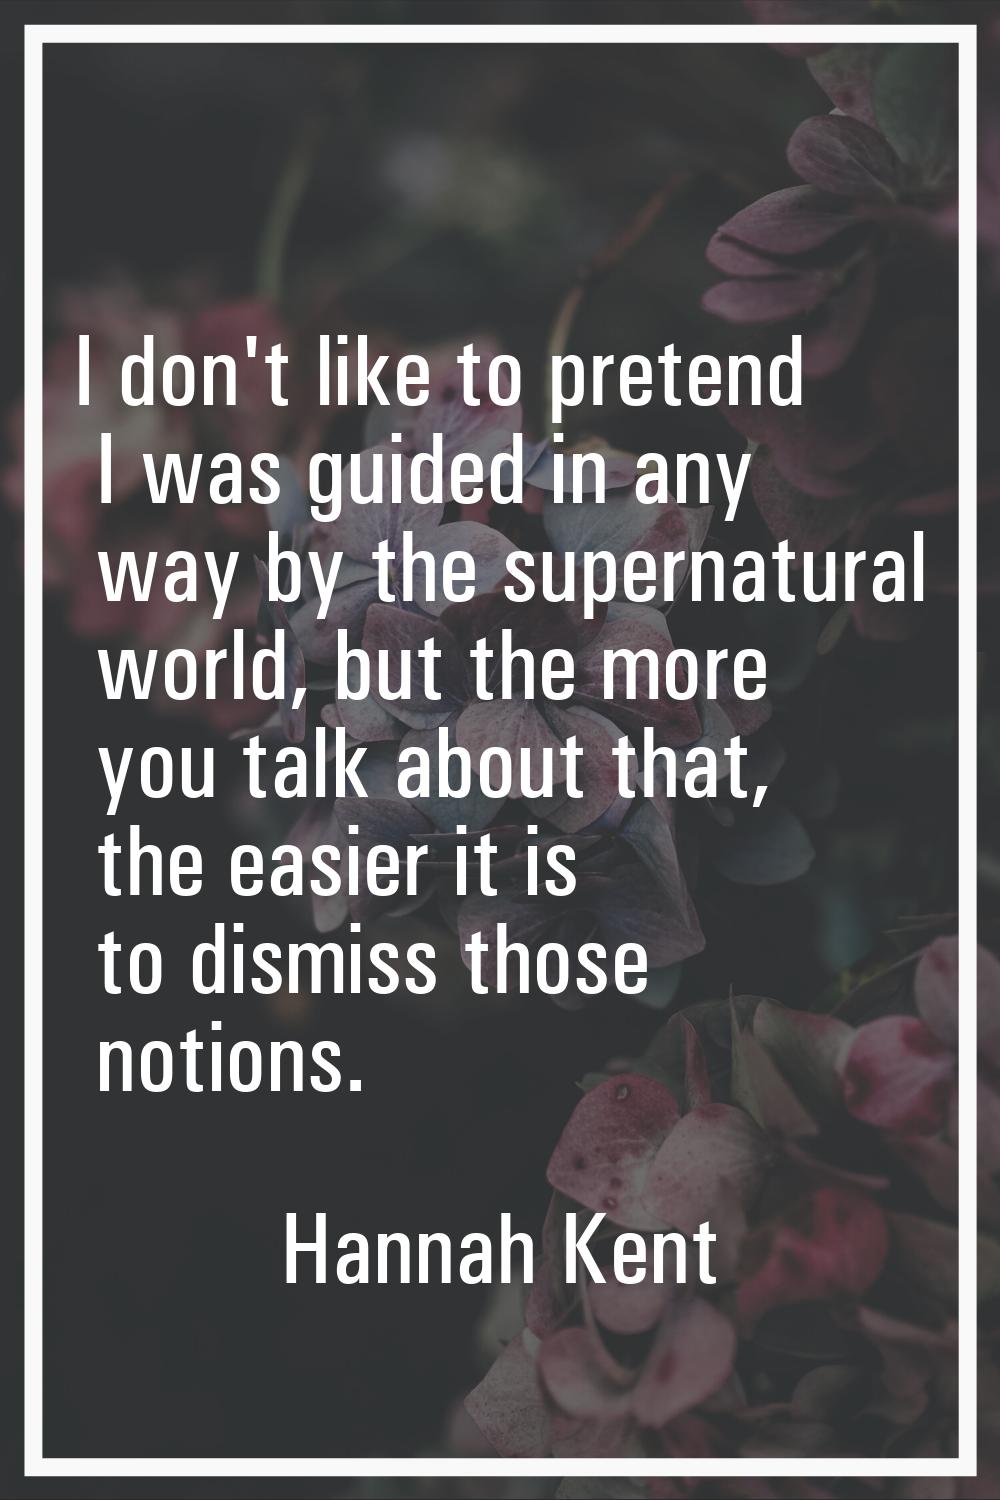 I don't like to pretend I was guided in any way by the supernatural world, but the more you talk ab